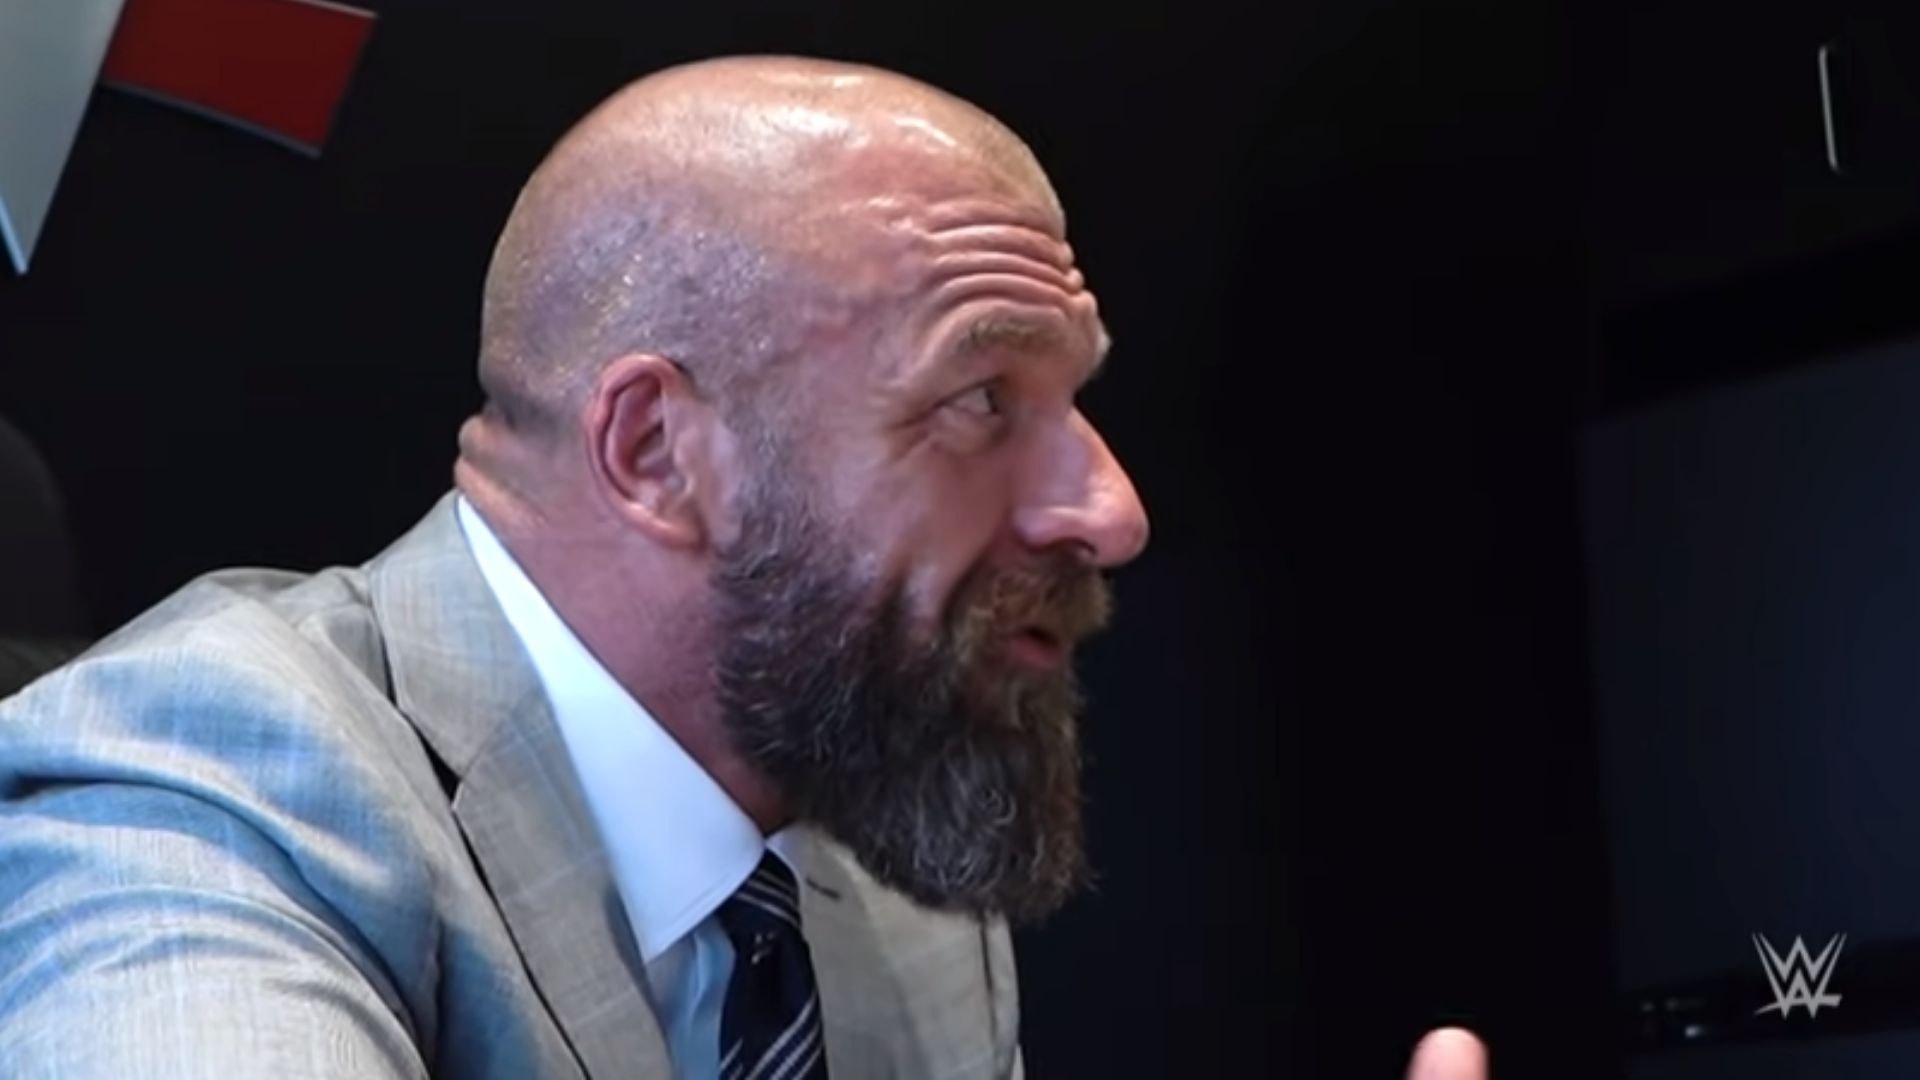 Triple H is no longer an in-ring competitor.